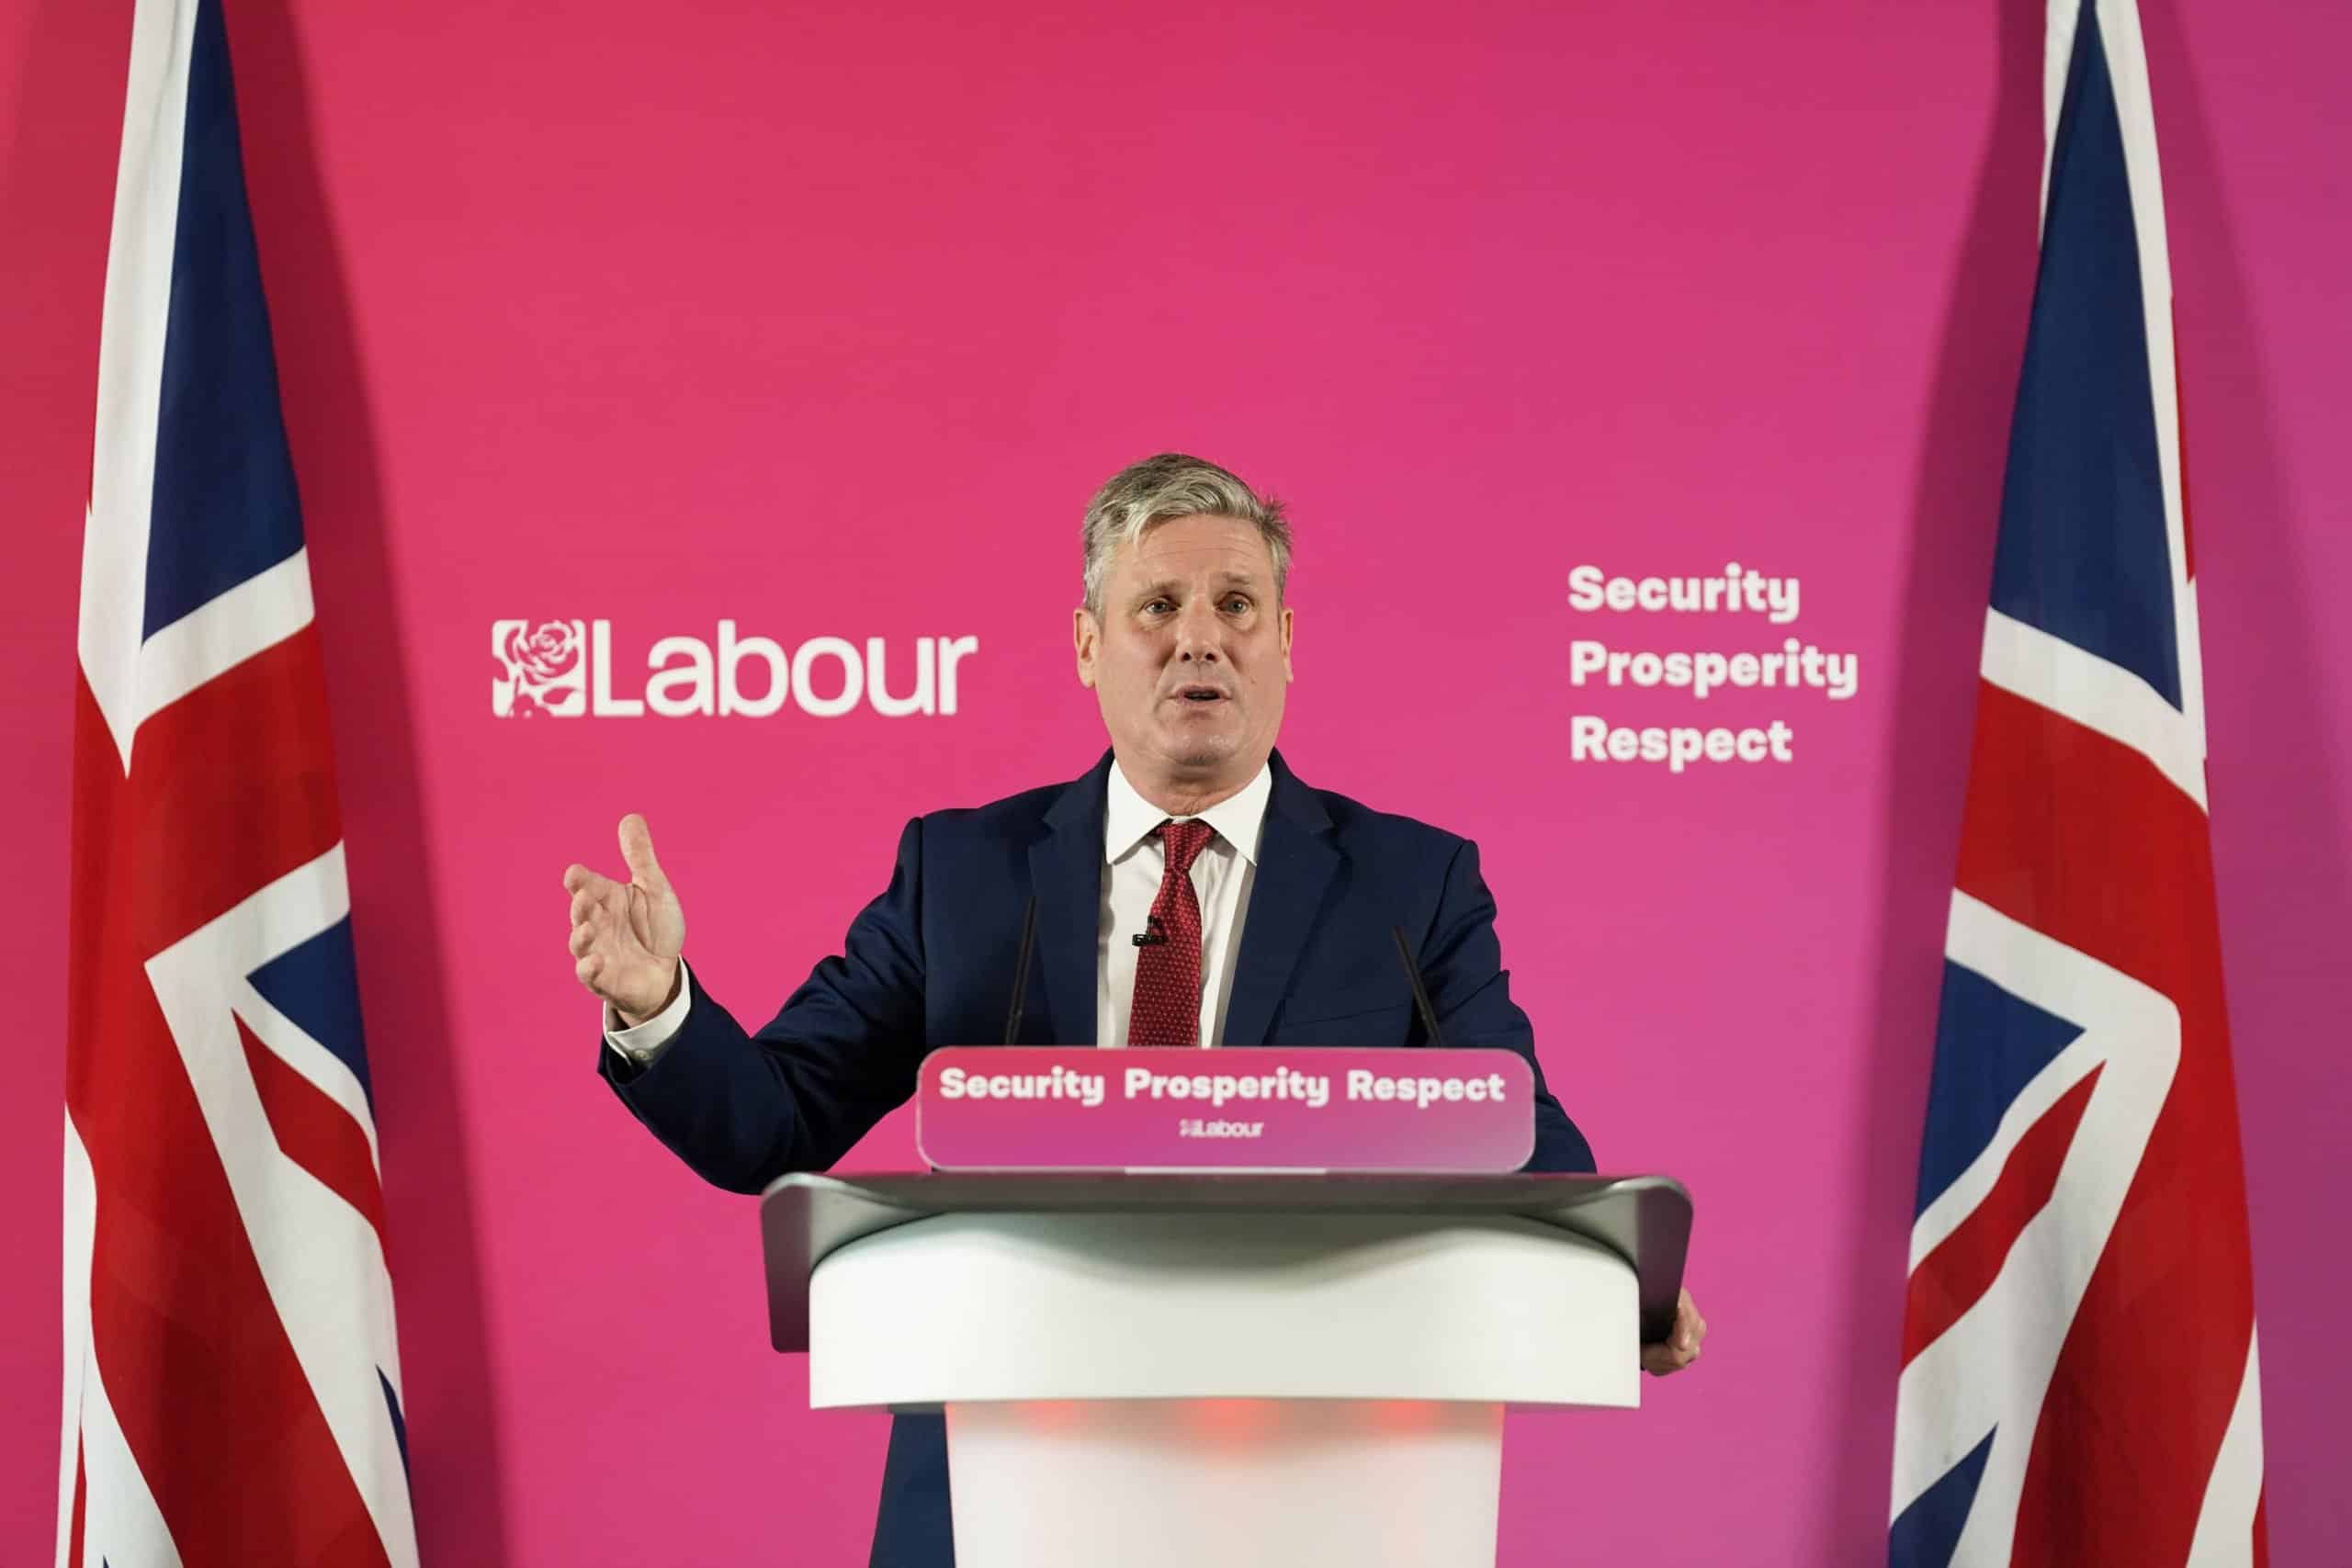 Starmer: Labour will ‘hand power to working people’ once in govt as he winds up unions